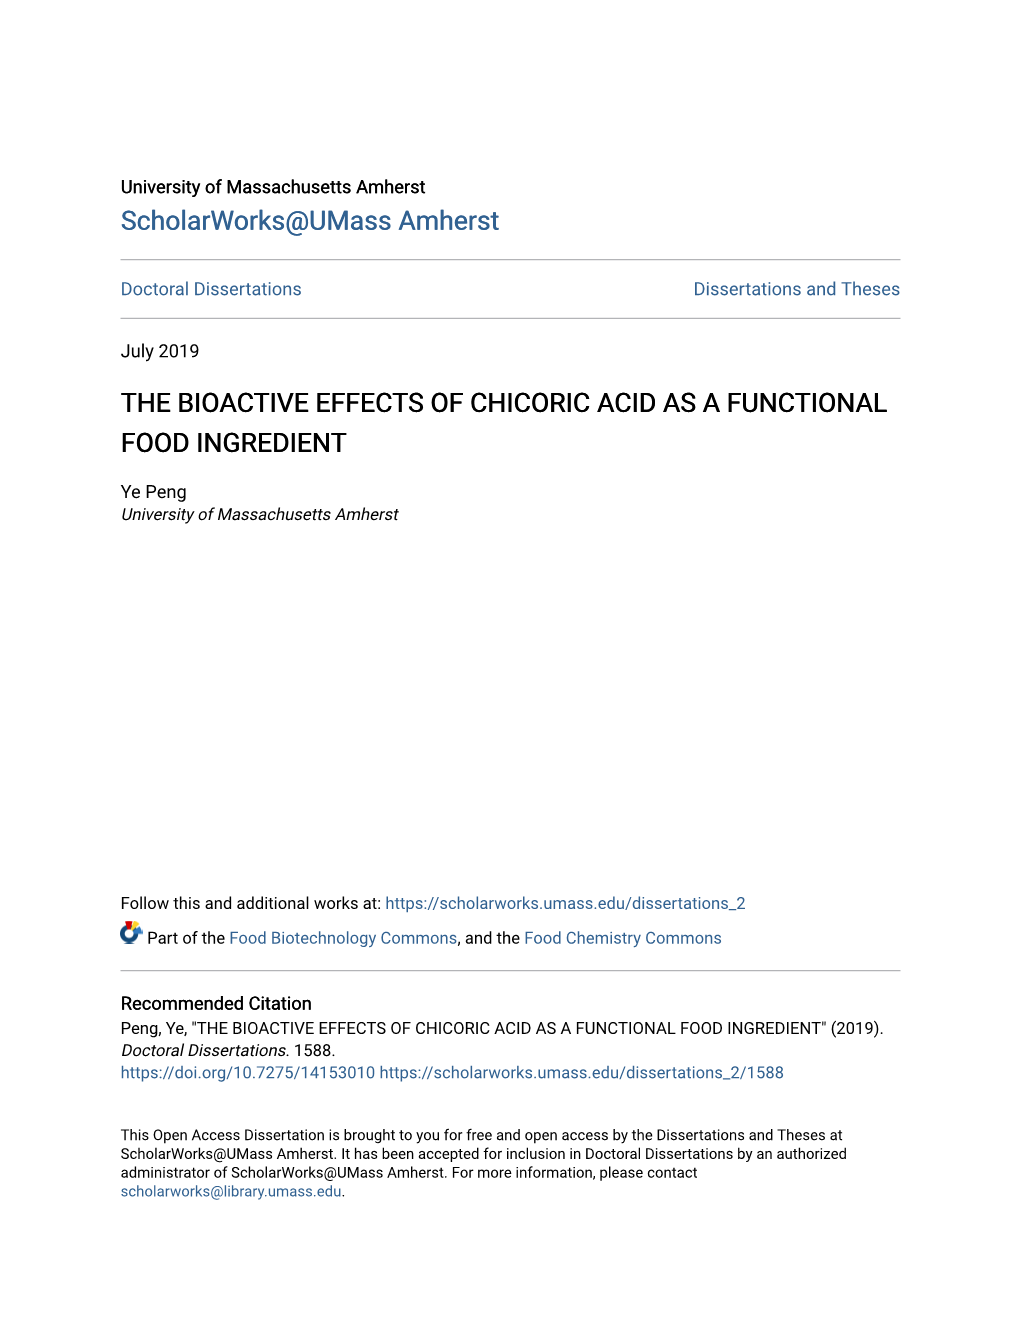 The Bioactive Effects of Chicoric Acid As a Functional Food Ingredient